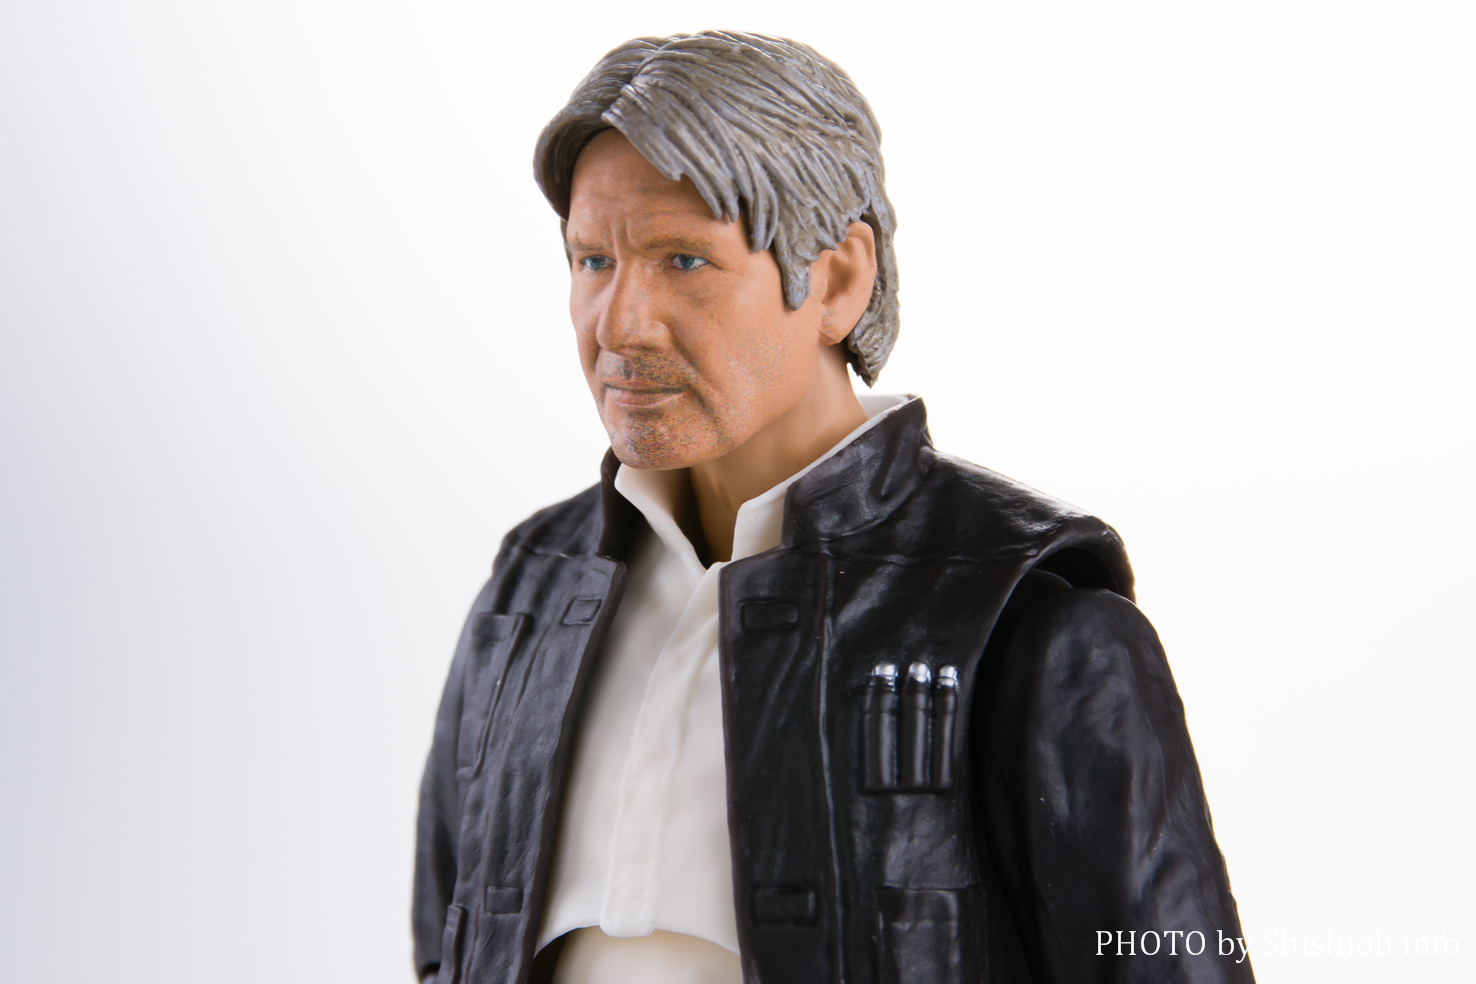 S.H.Figuarts ハン・ソロ（STAR WARS: The Force Awakens）